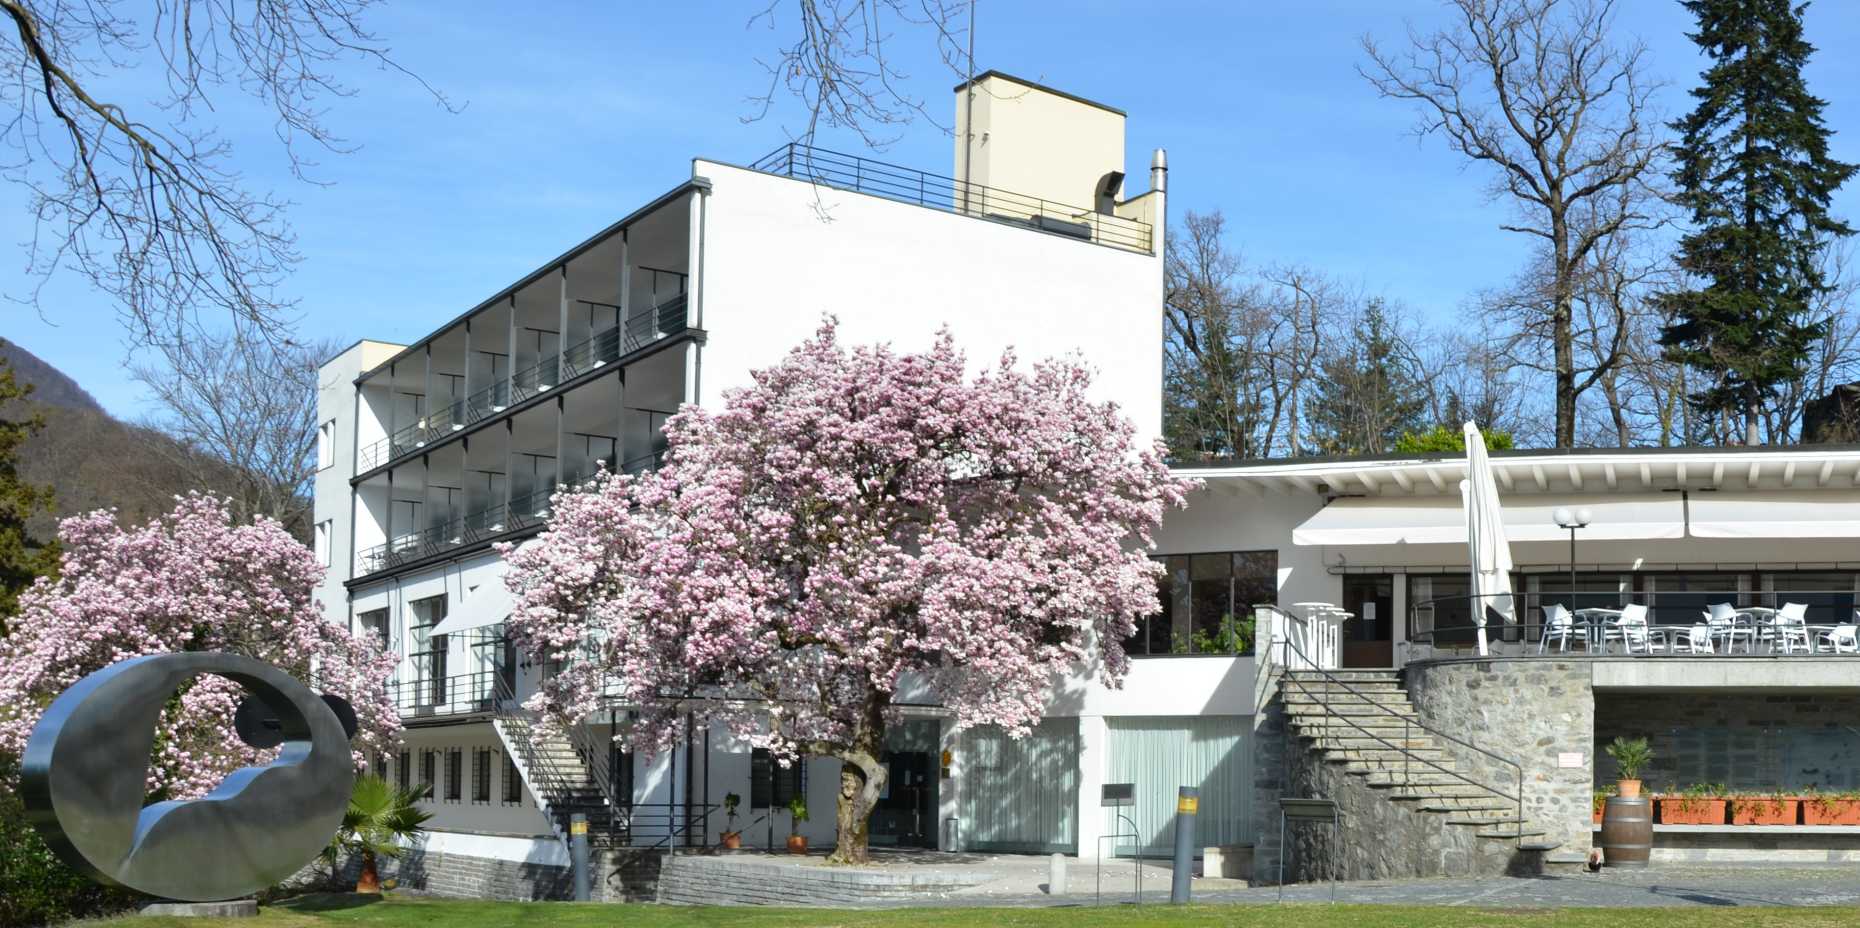 Since 1989 the Congressi Stefano Franscini (CSF) has been ETH Zurich’s conference platform in the Canton of Ticino. Researchers can organise research conferences at Monte Verità. (Photo: CSF)